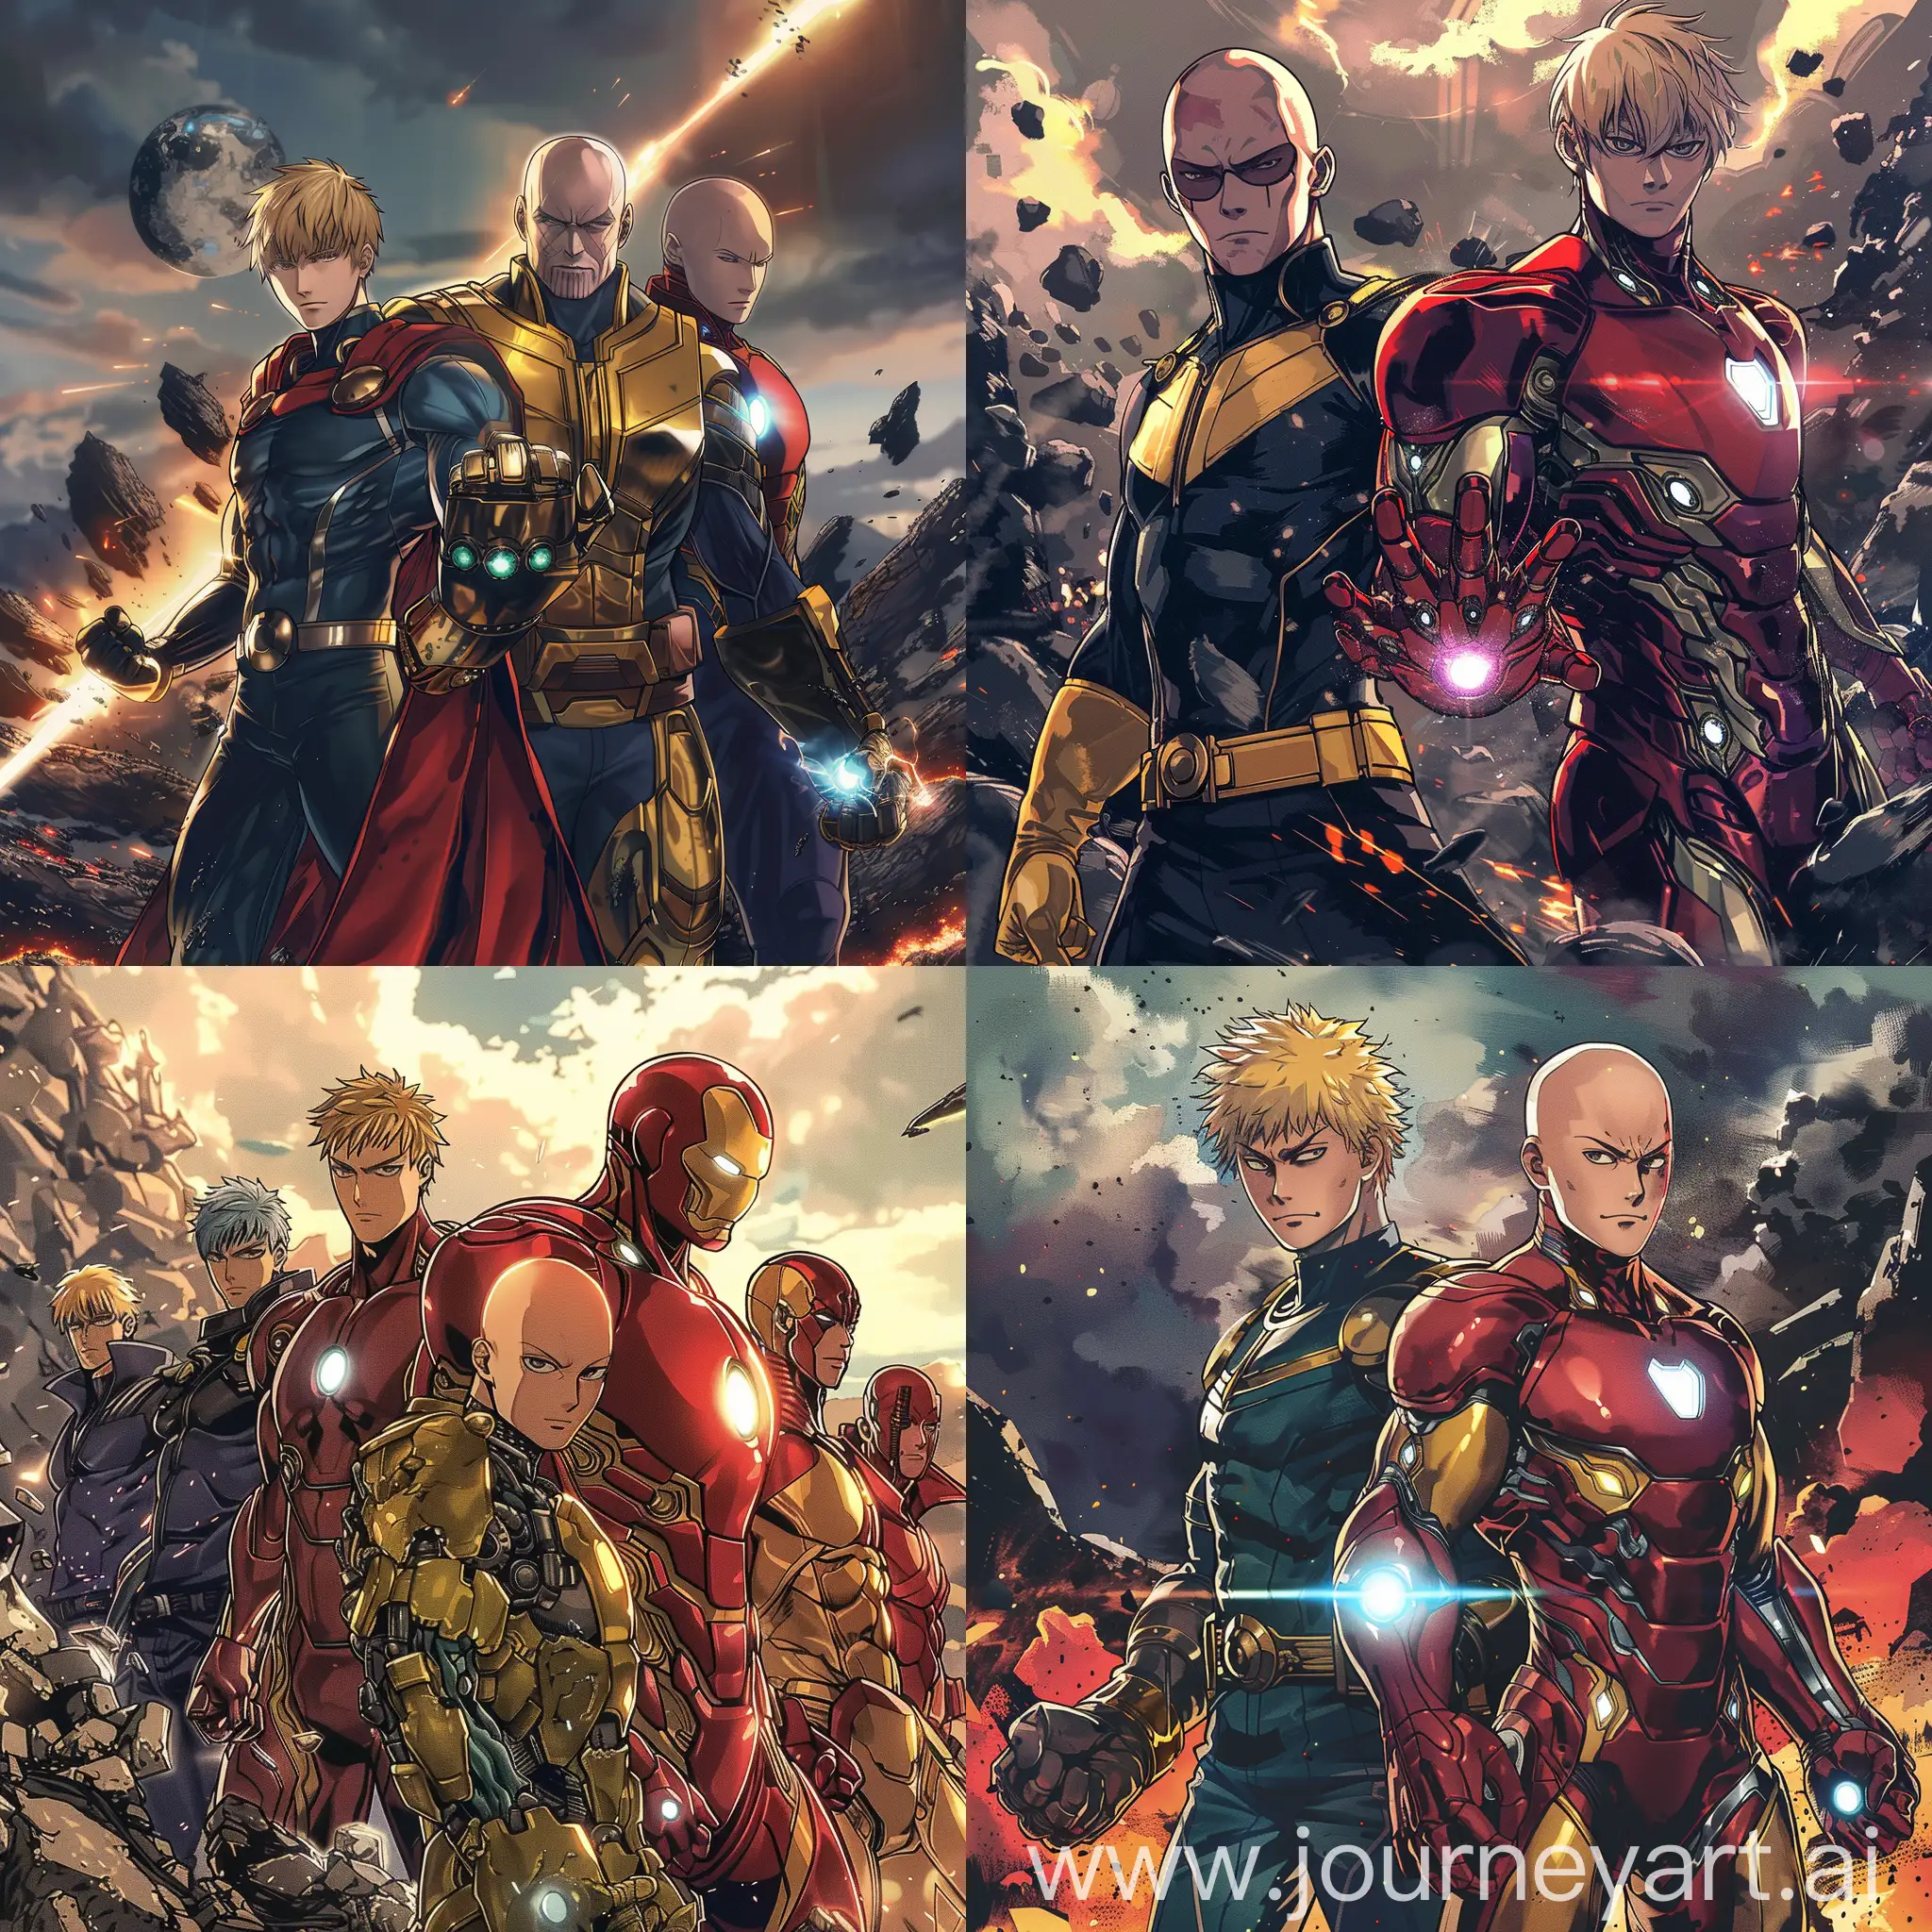 Saitama and Genos joined the Avengers team to defeat Thanos.